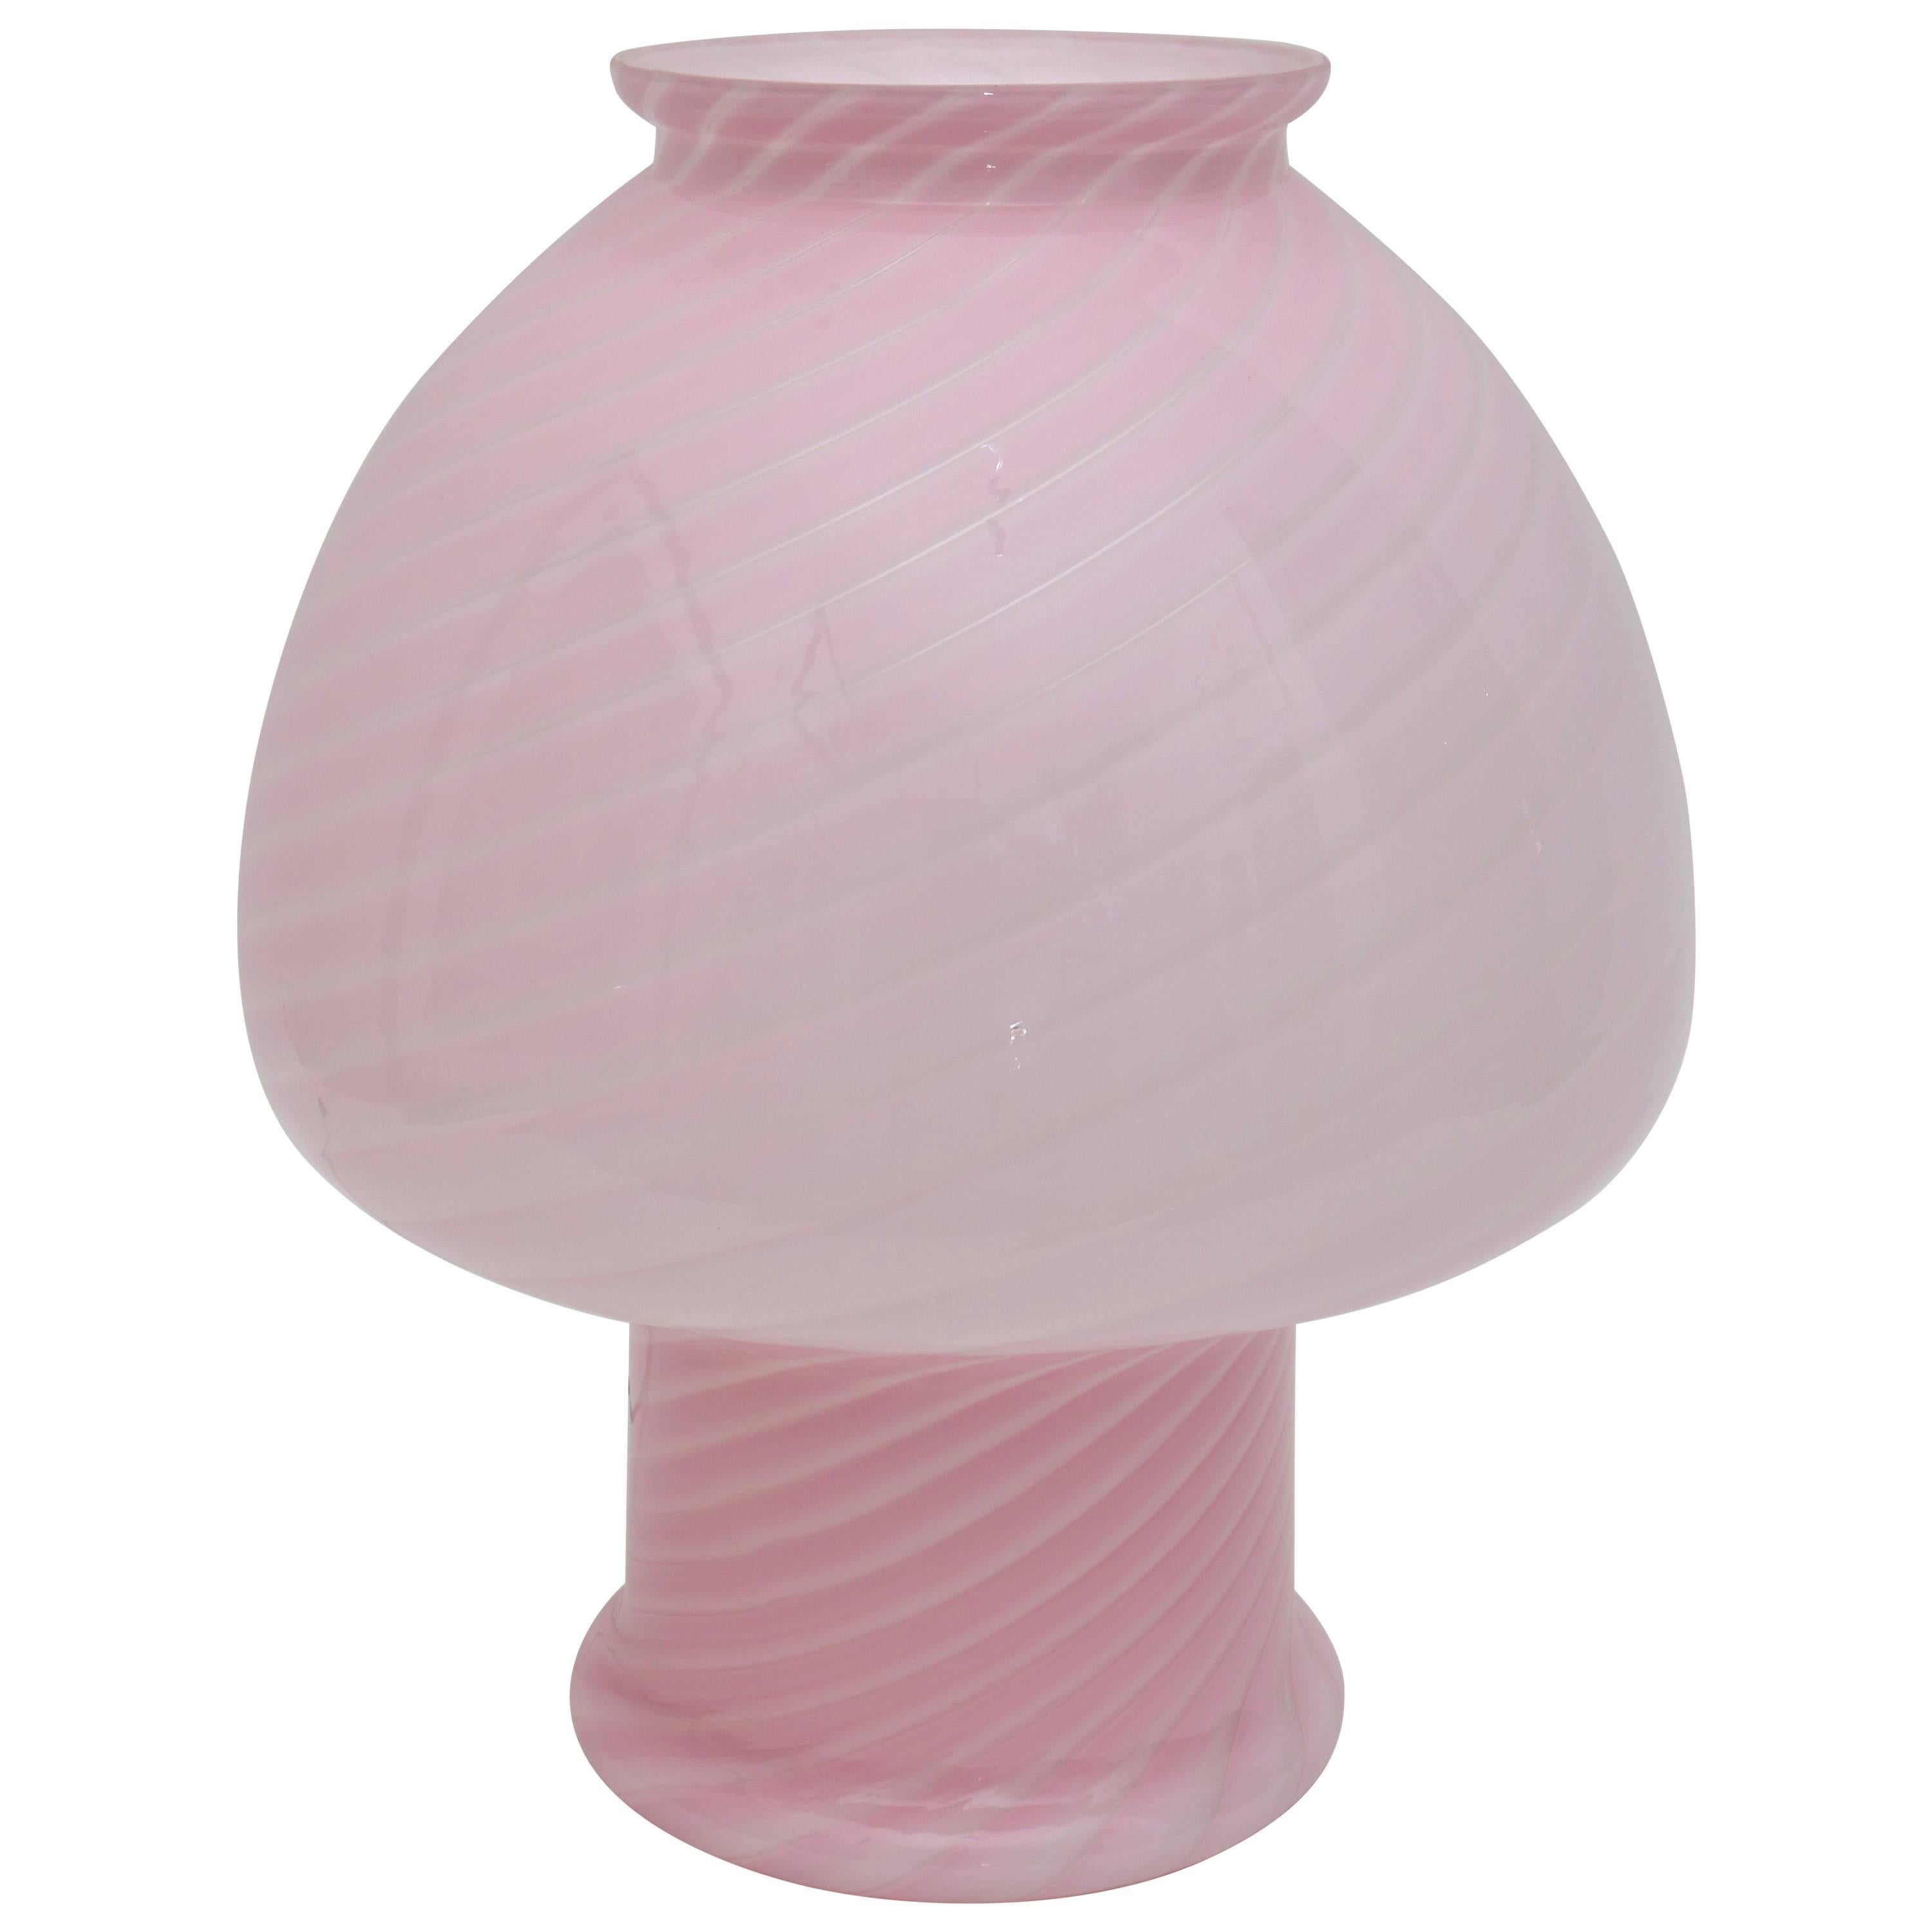 Vetri Murano Pink Glass Table Lamp in a Mushroom Form and Swirl Motif